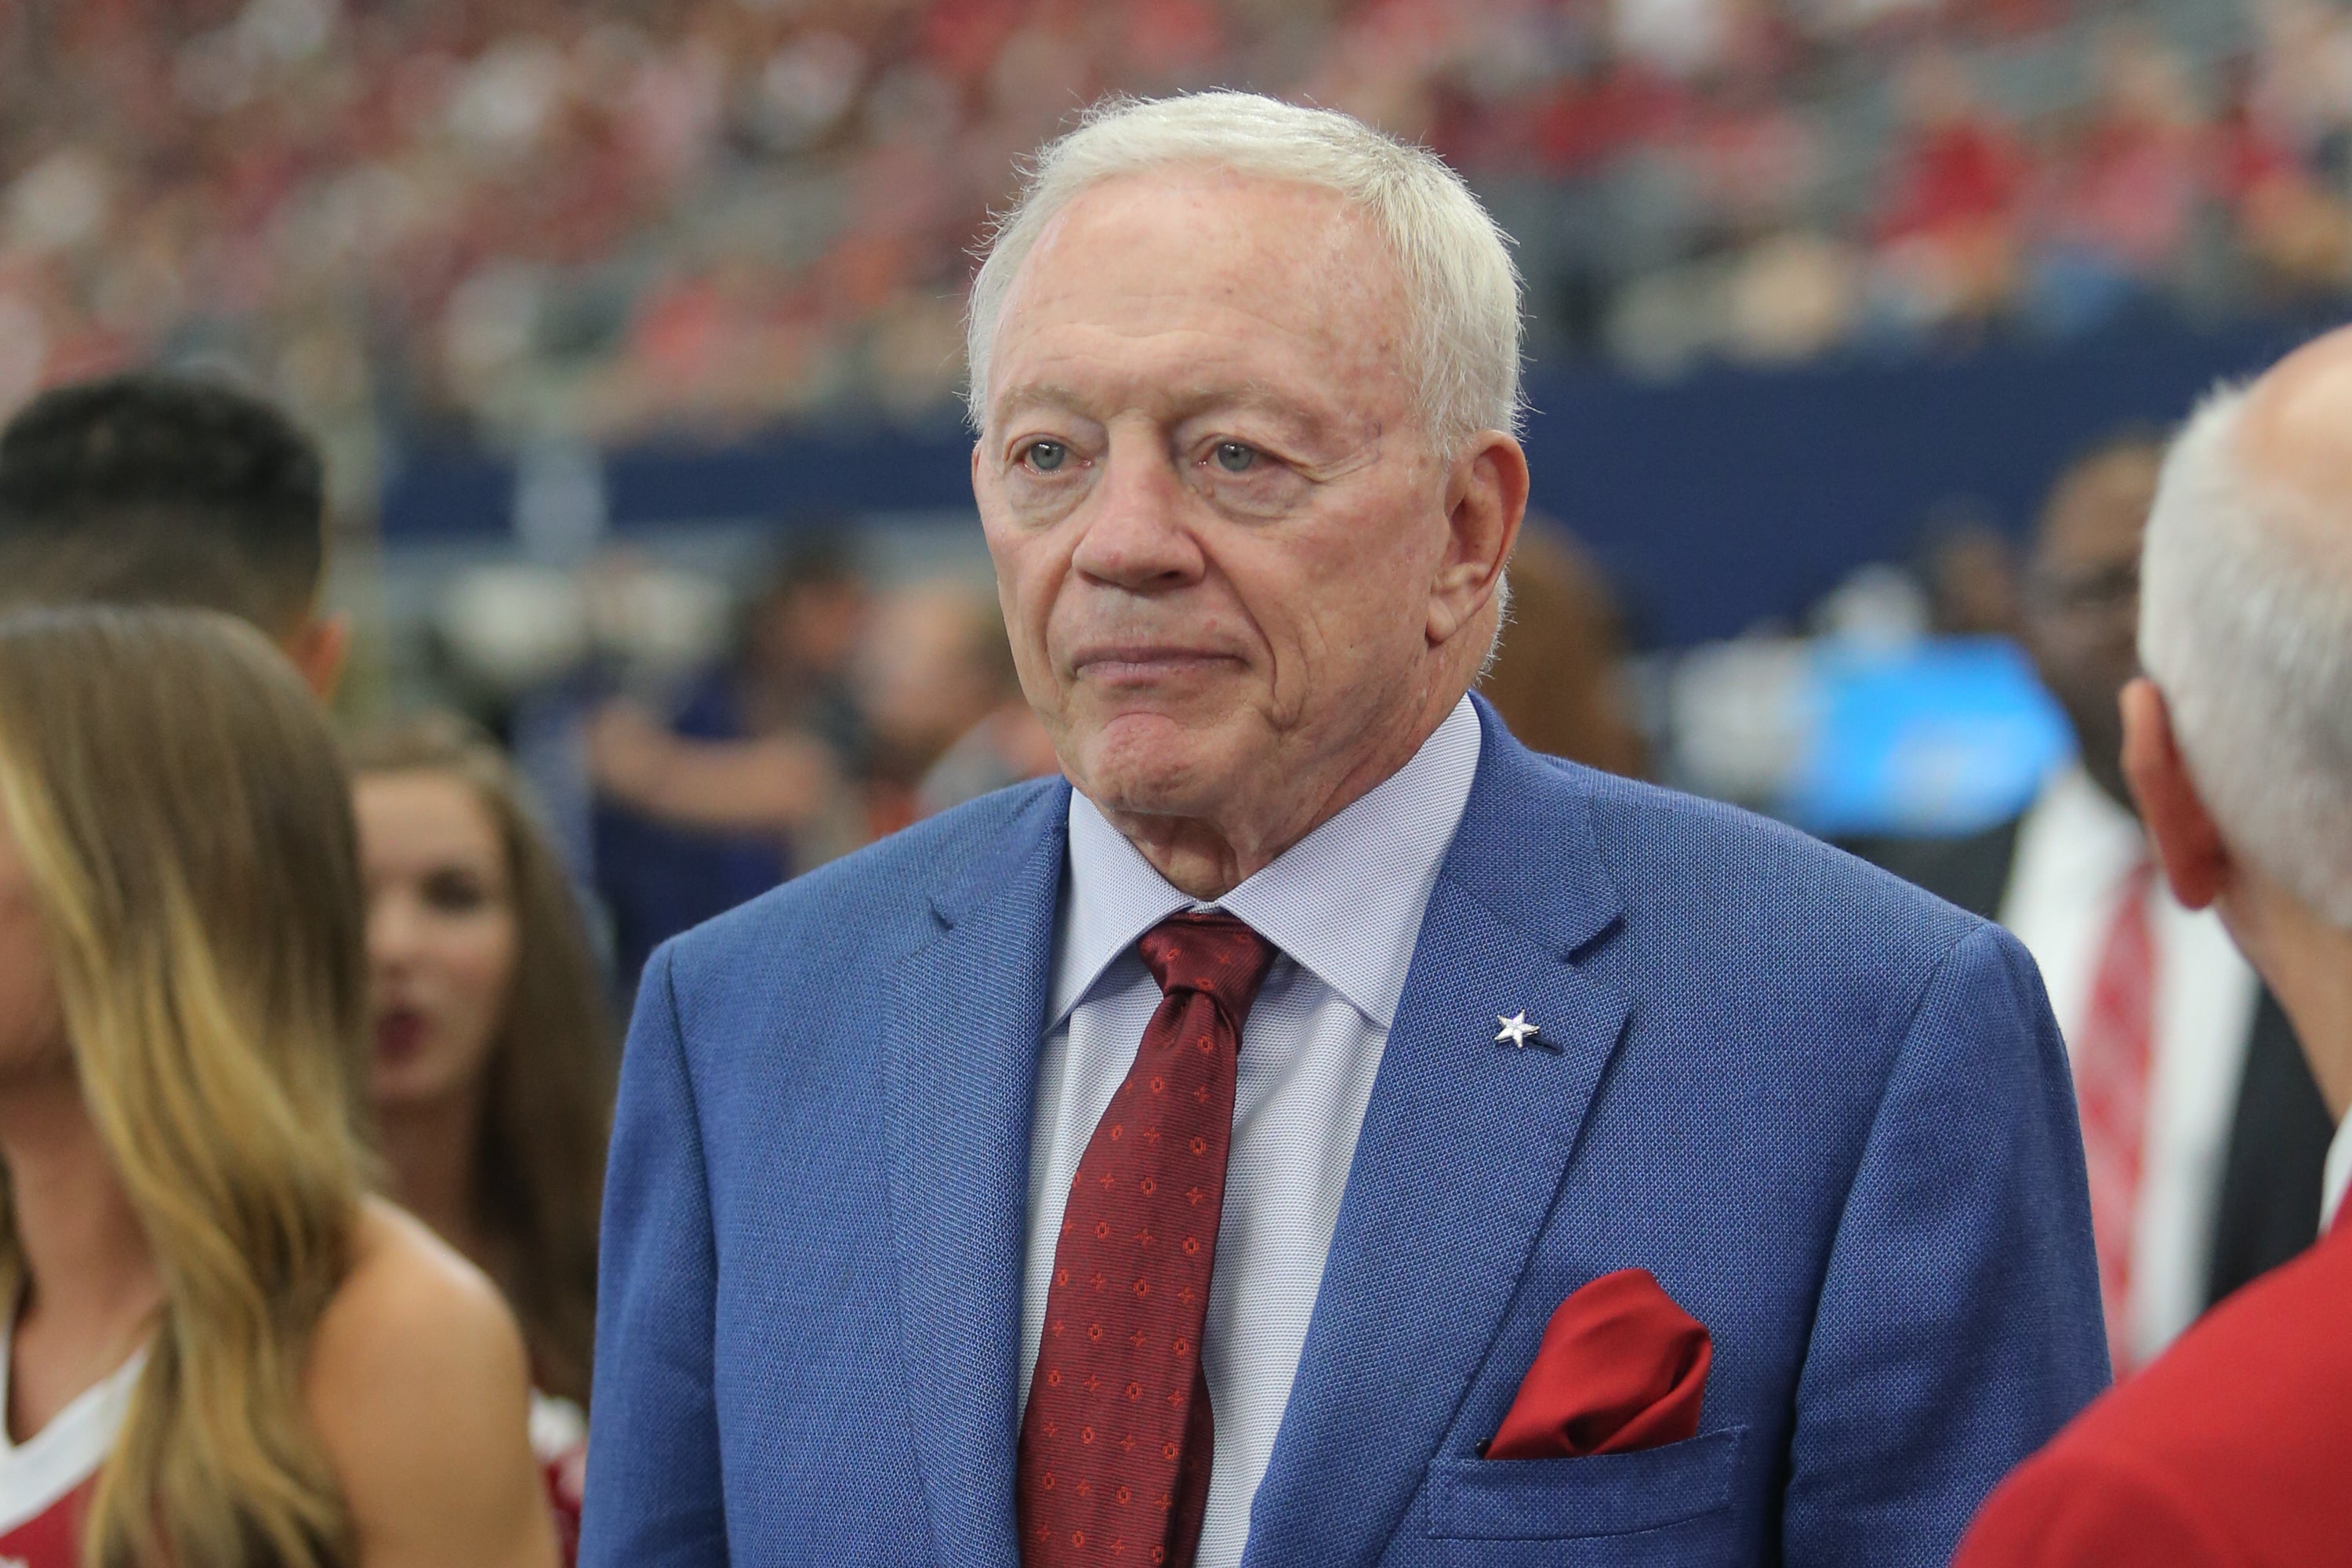 Dallas Cowboys Owner To Players: If You Disrespect The Flag, You Will Not Play
